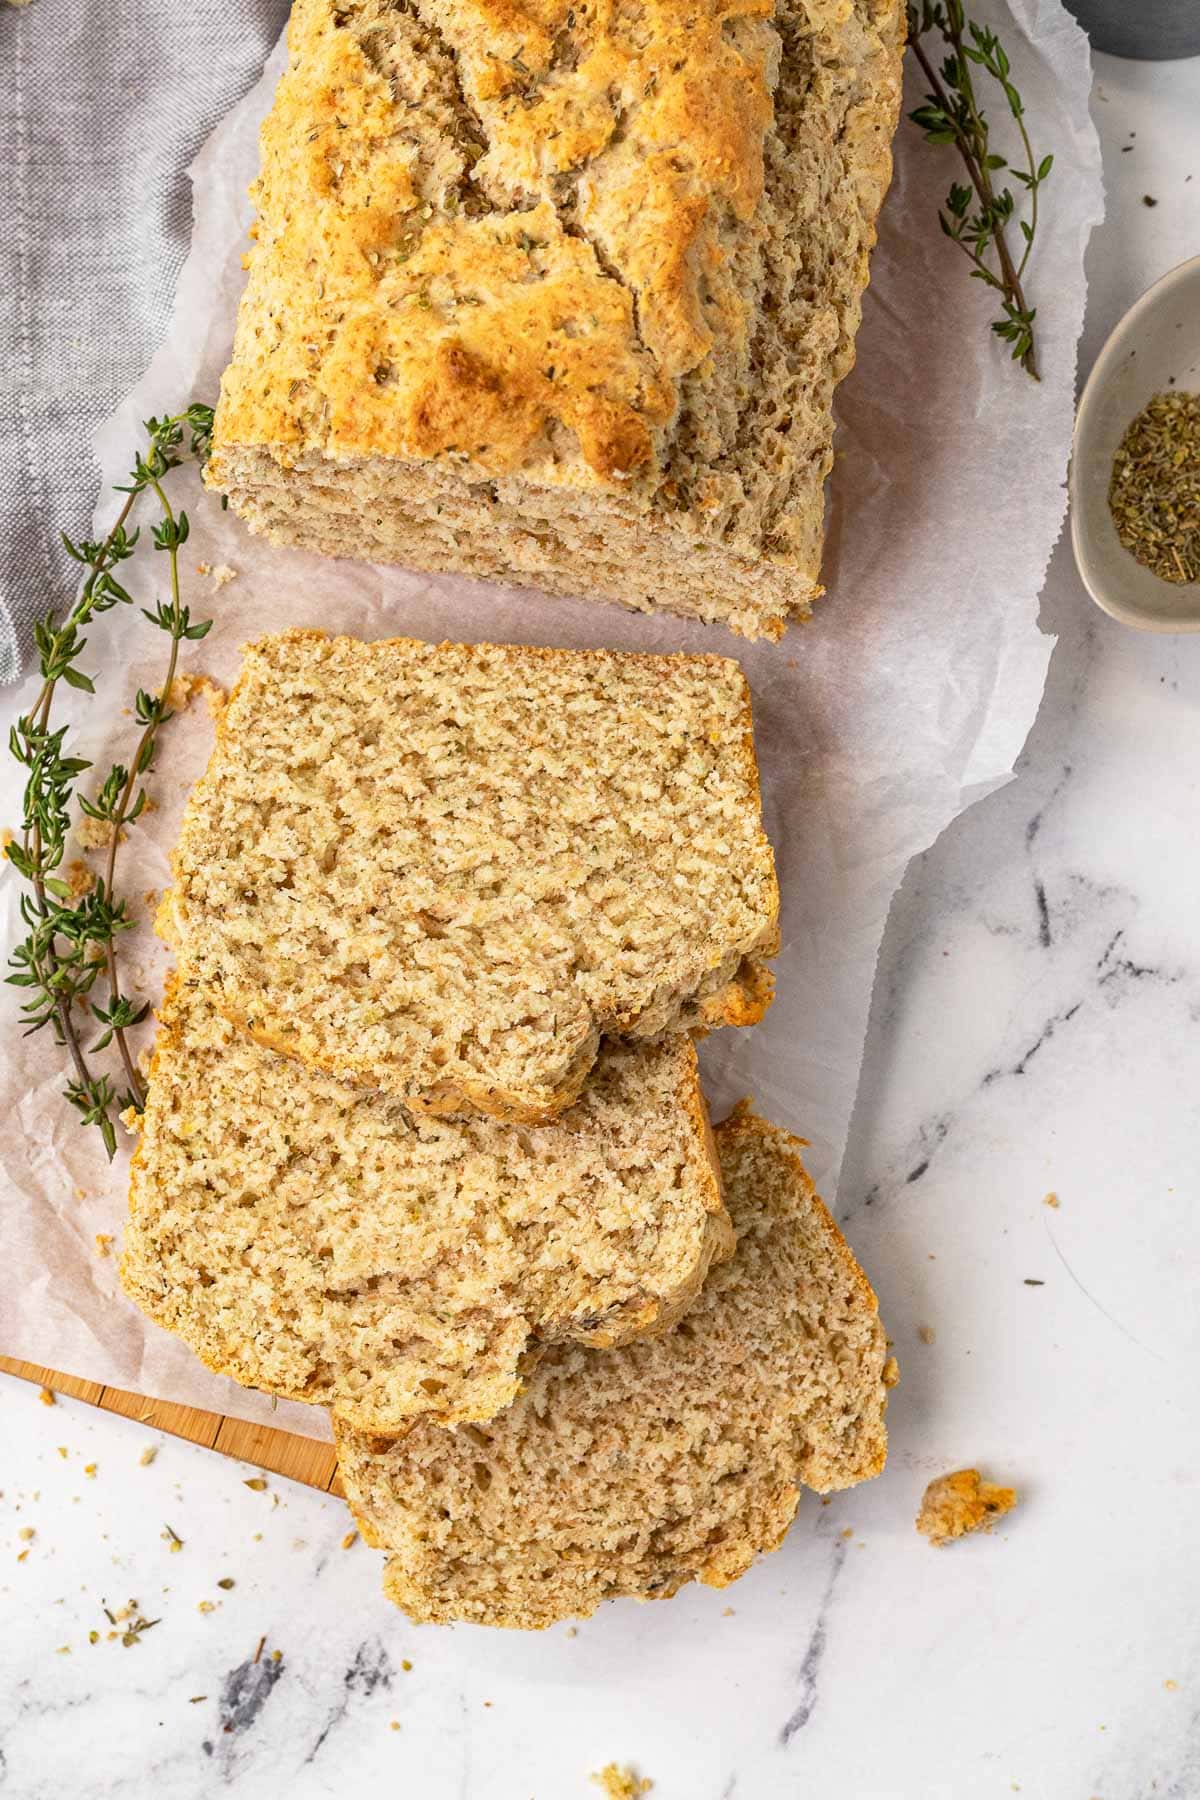 Herb Quick Bread baked bread slices and loaf